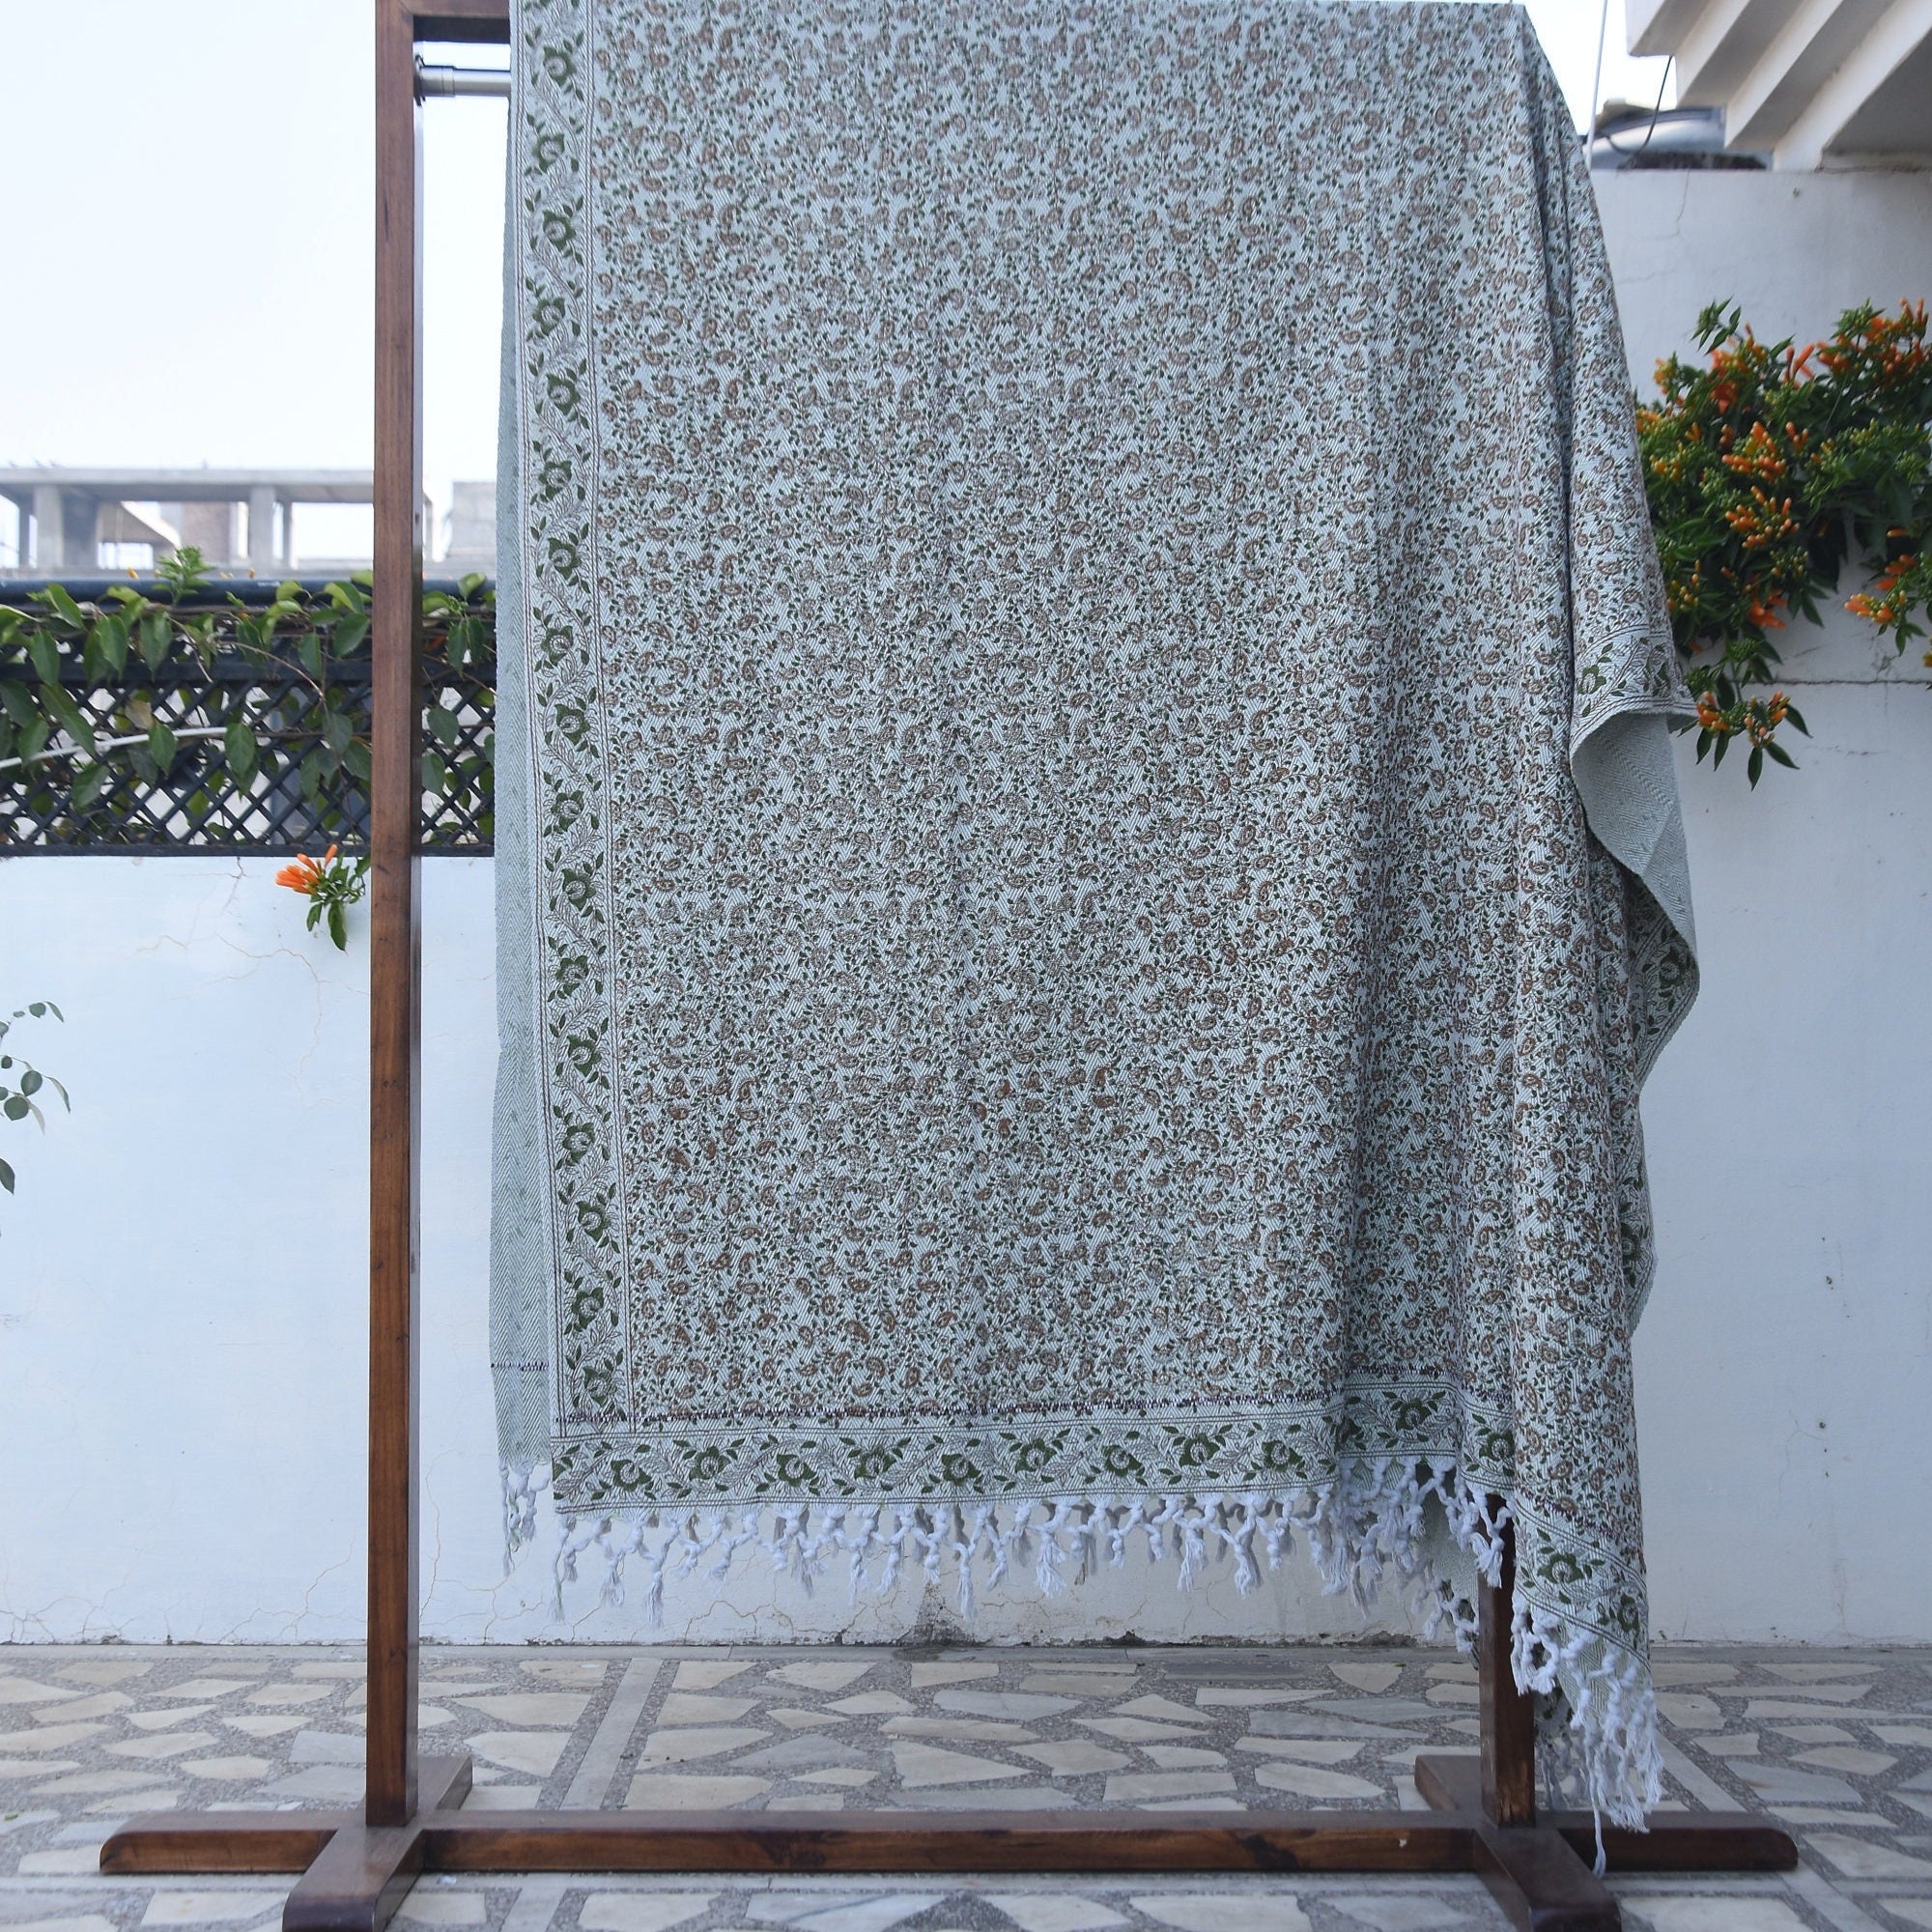 Handwoven Block Print Throws - Blankets and Throws - Handmade Blankets - Handwoven Handloom Fabric - KERI JAAL